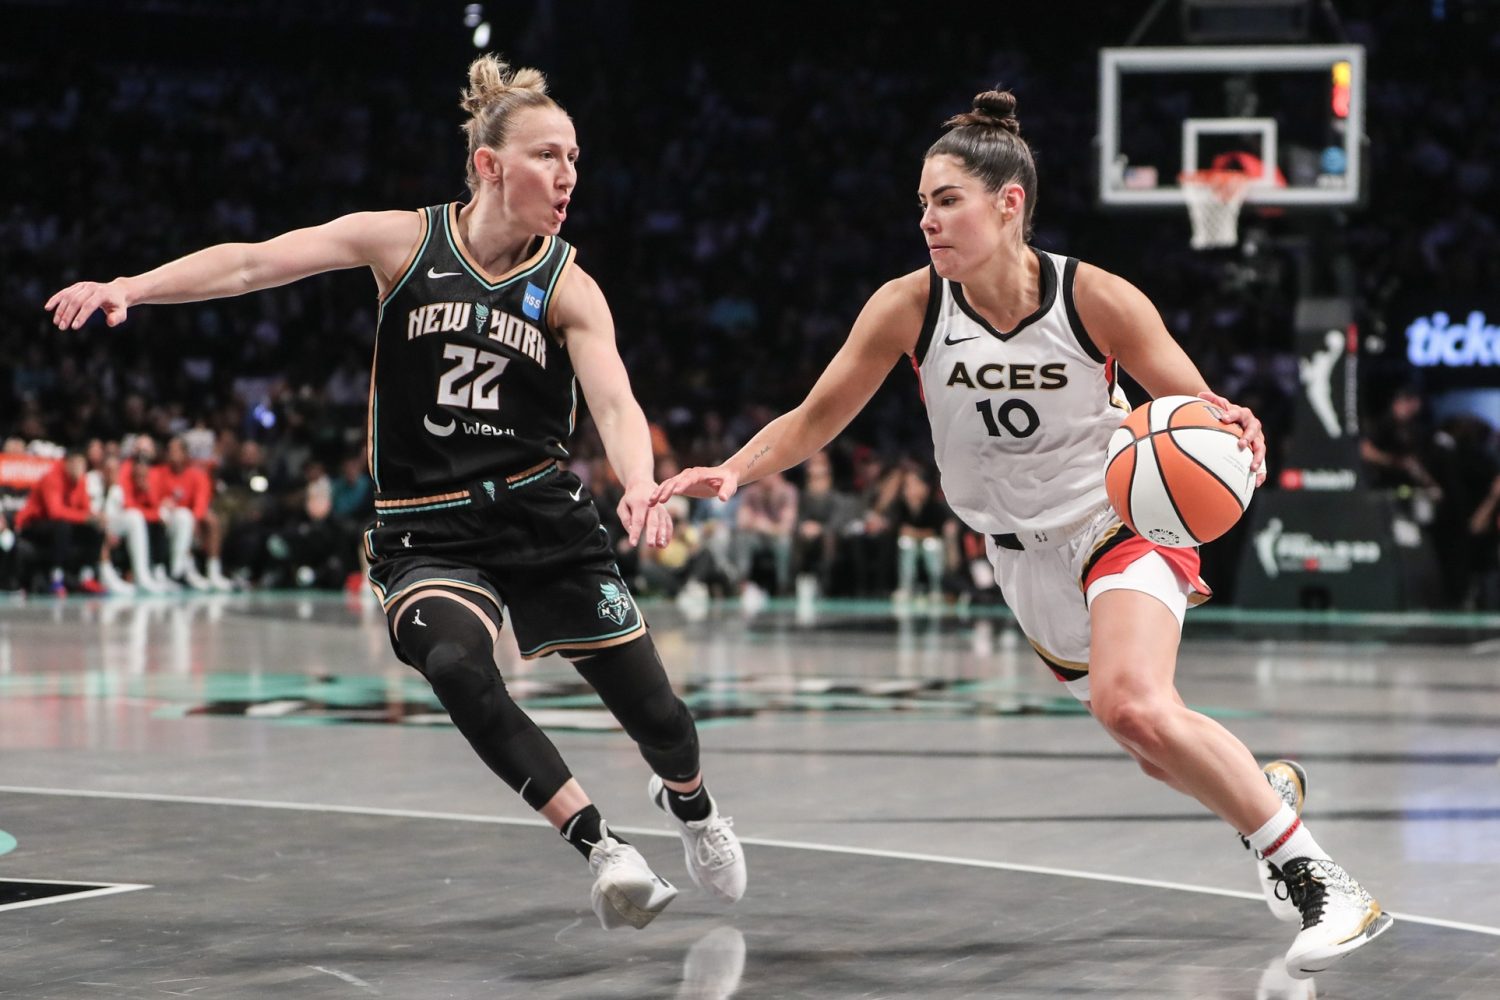 Las Vegas Aces guard Kelsey Plum is defended by New York Liberty guard Courtney Vandersloot in the second quarter during game three of the 2023 WNBA Finals at Barclays Center.